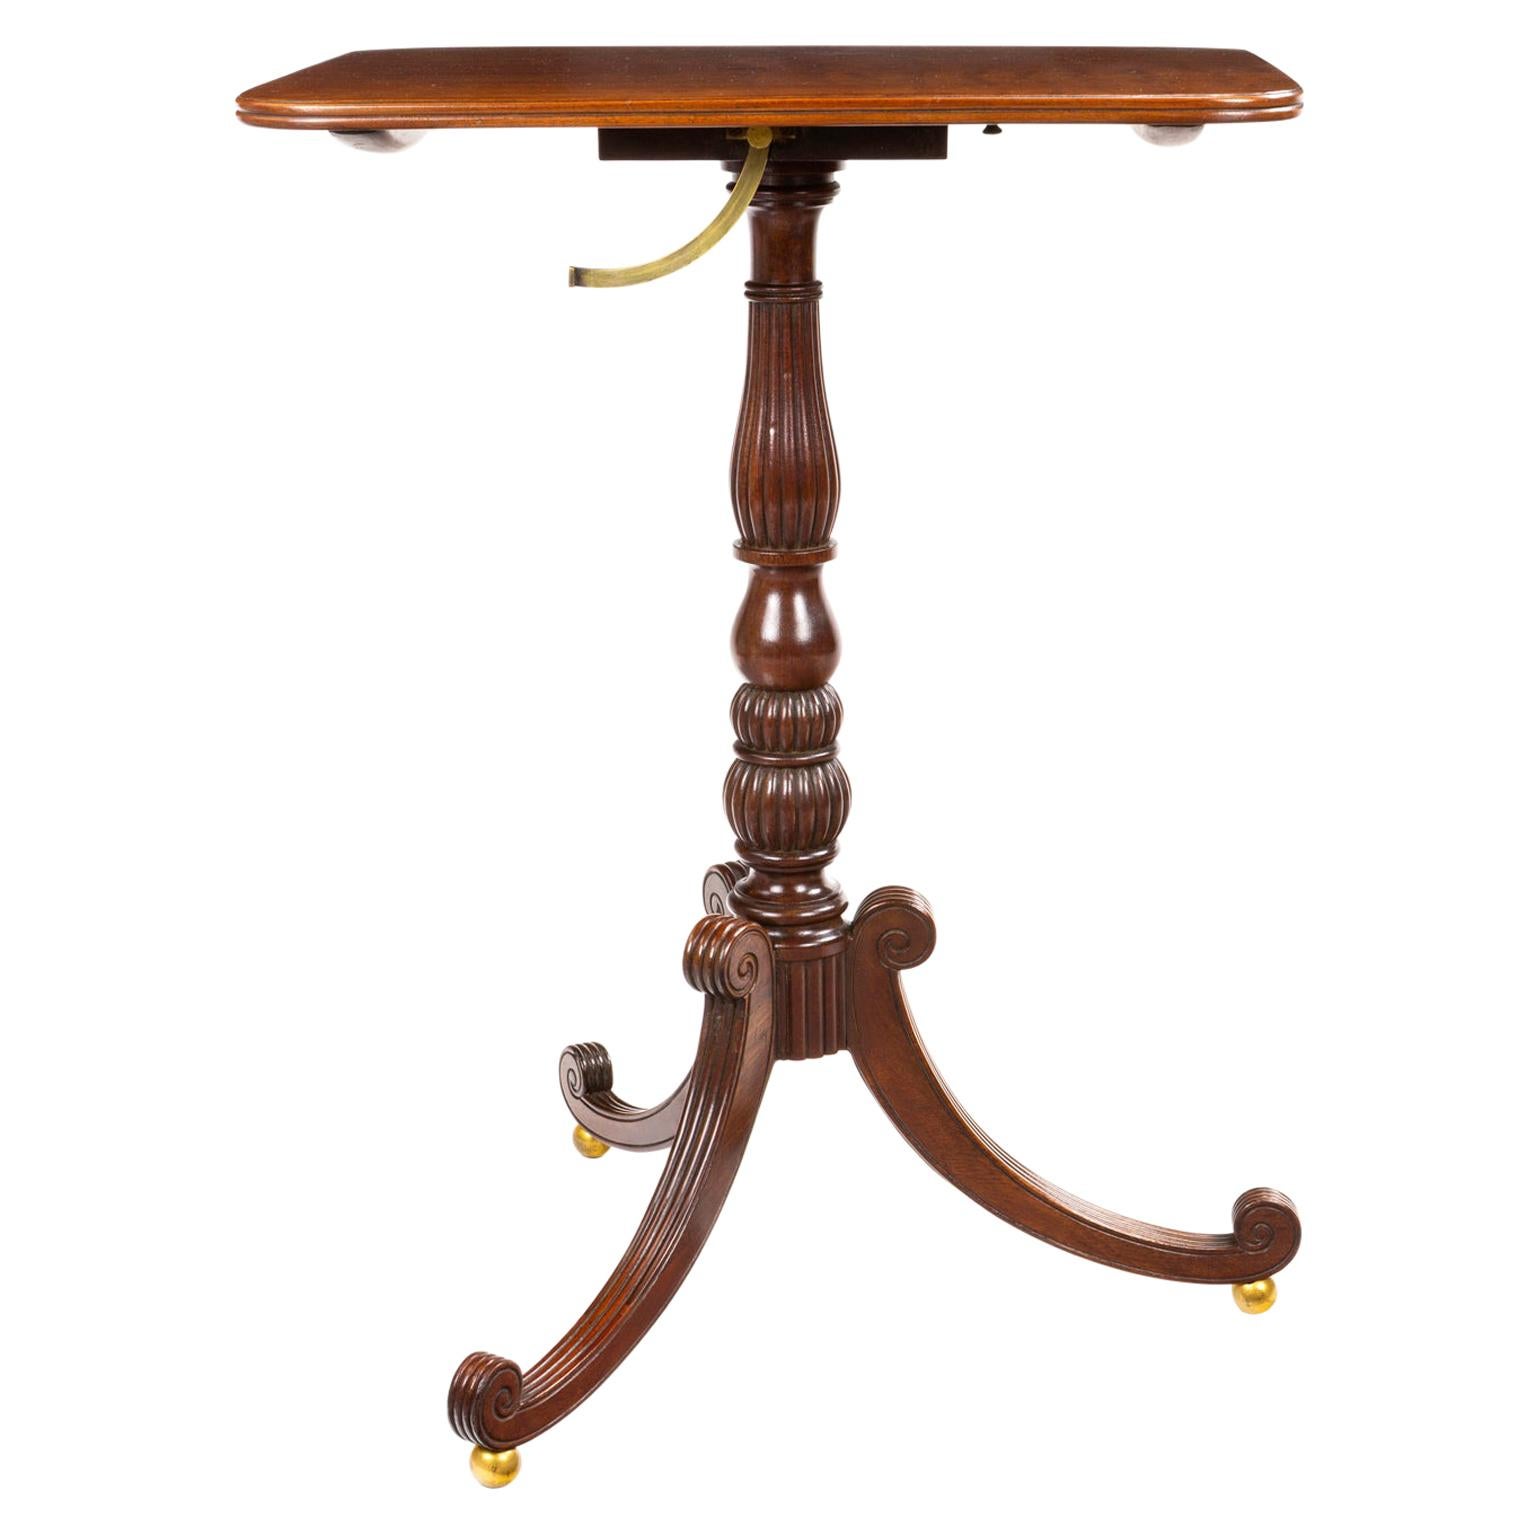 Regency Pedestal Table Attributed to Gillows of Lancaster and London in Plumb Pu